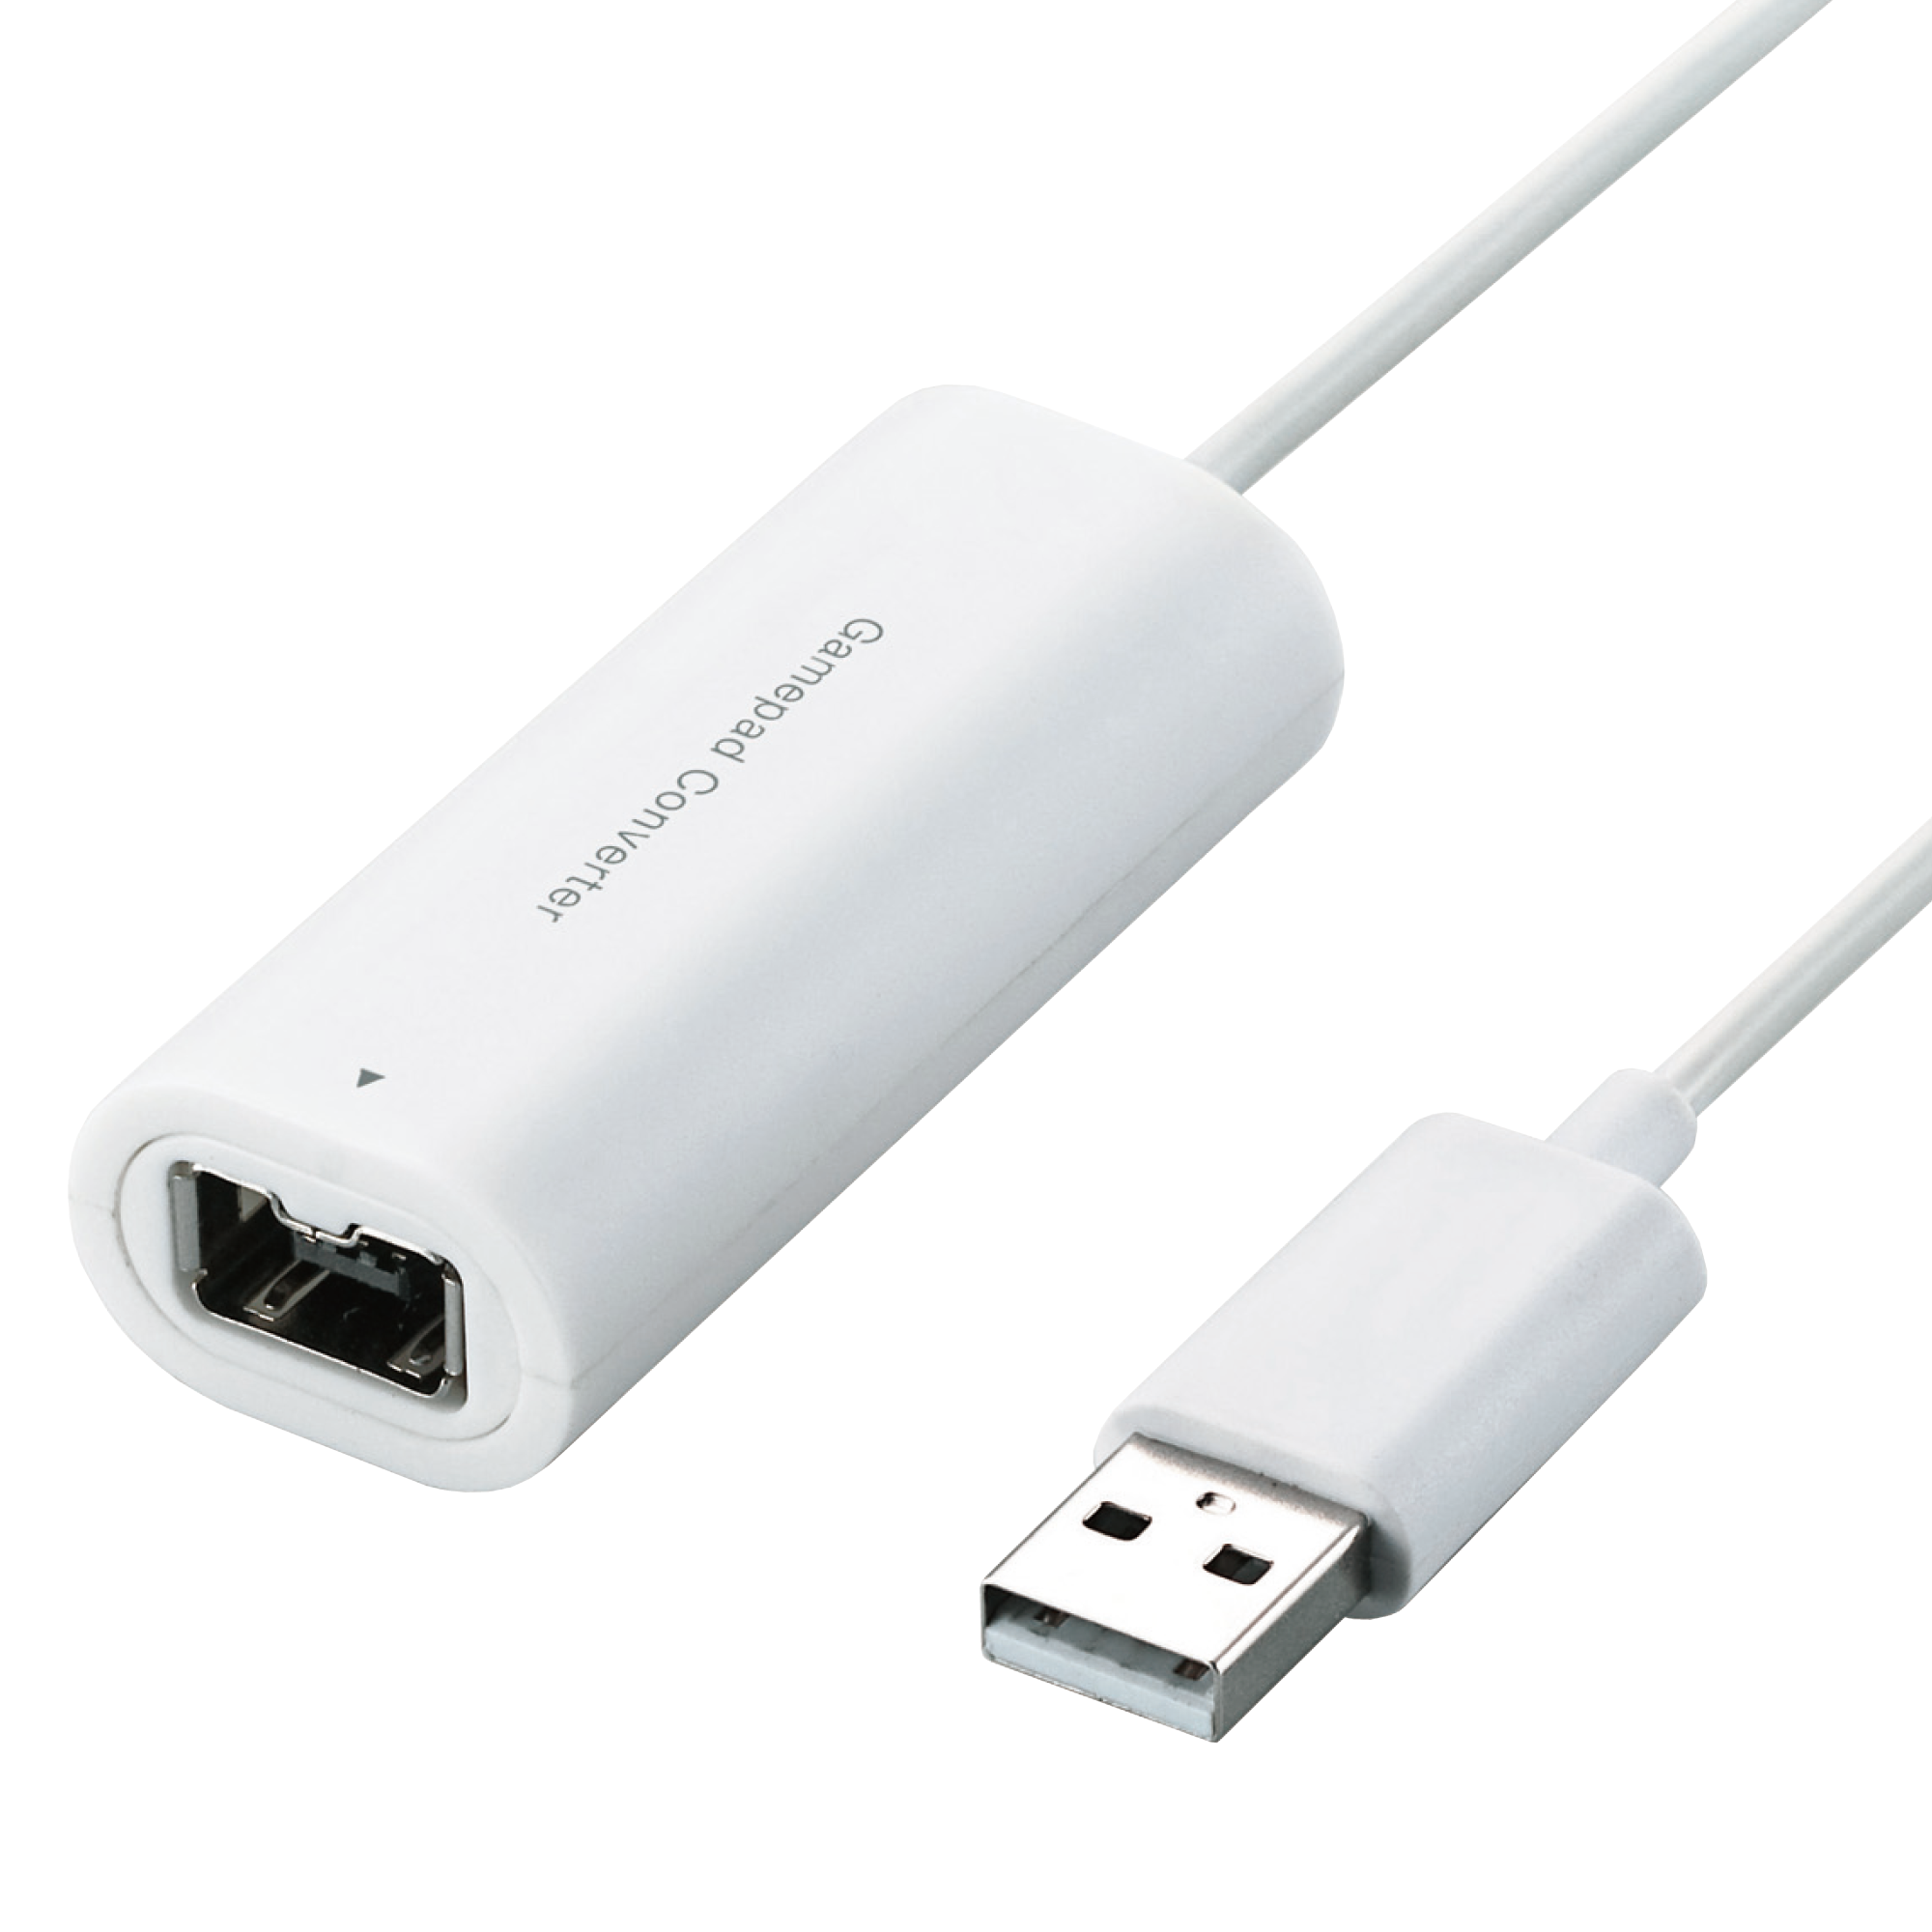 Wii USB Adapter Cable - 1 Meter